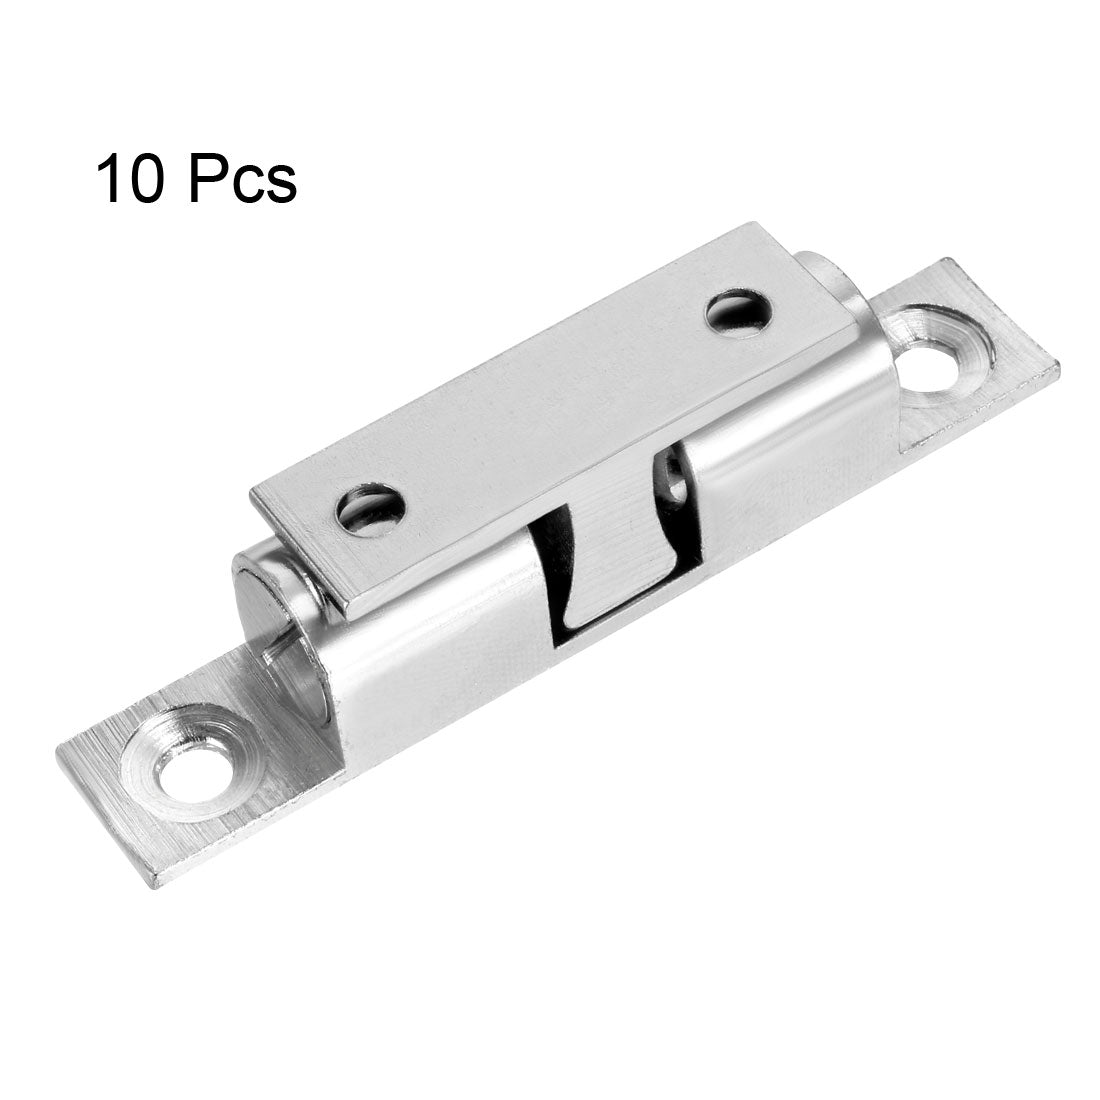 uxcell Uxcell 10pcs Cabinet Door Closet Brass Double Ball Catch Tension Latch 70mm Length Silver Tone